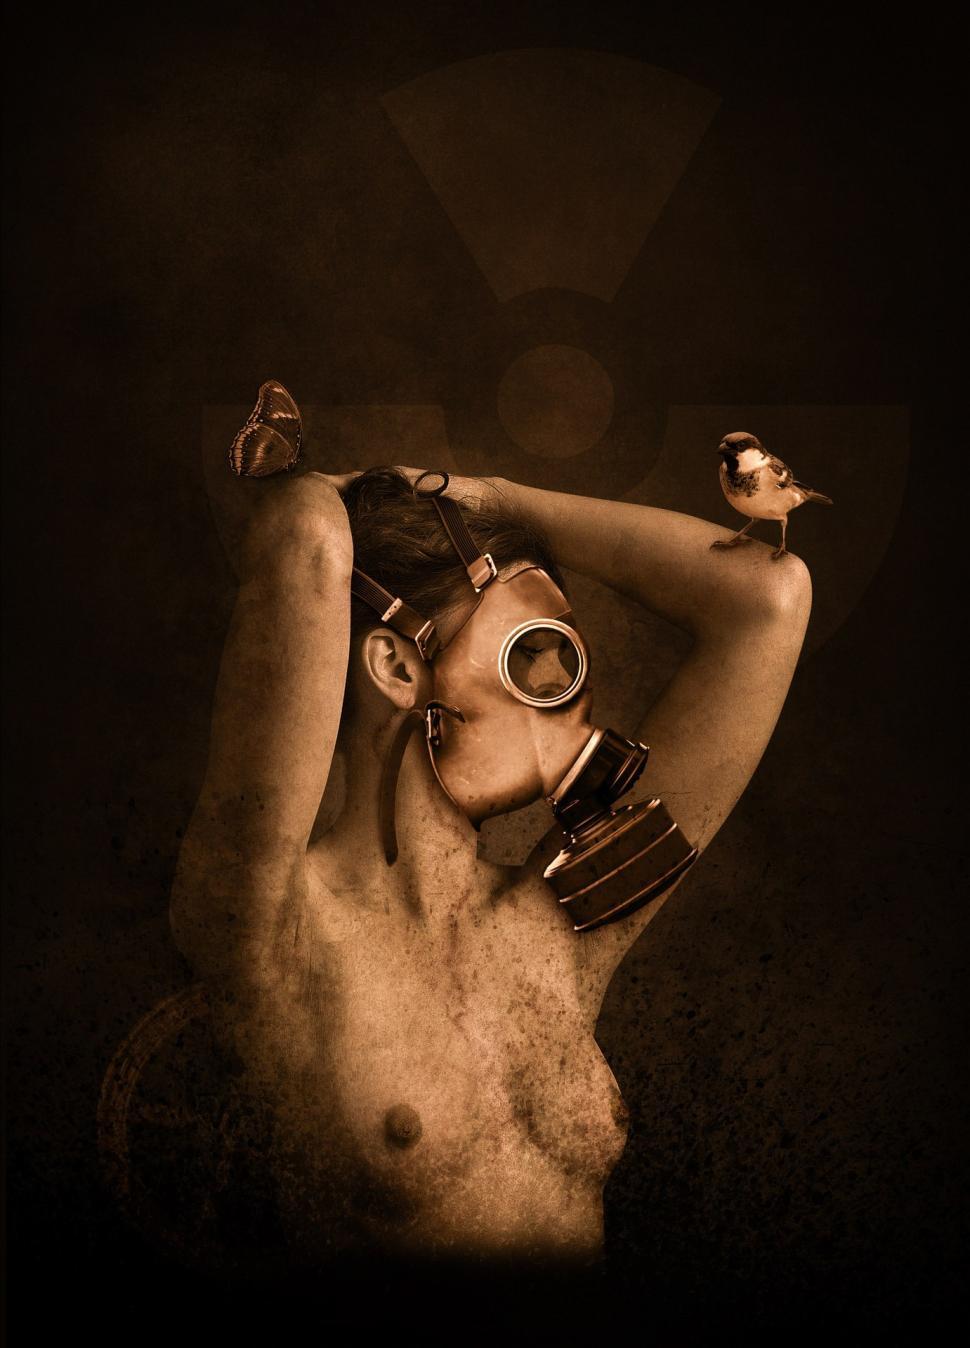 Free Image of Man With Gas Mask and Bird on Shoulder 